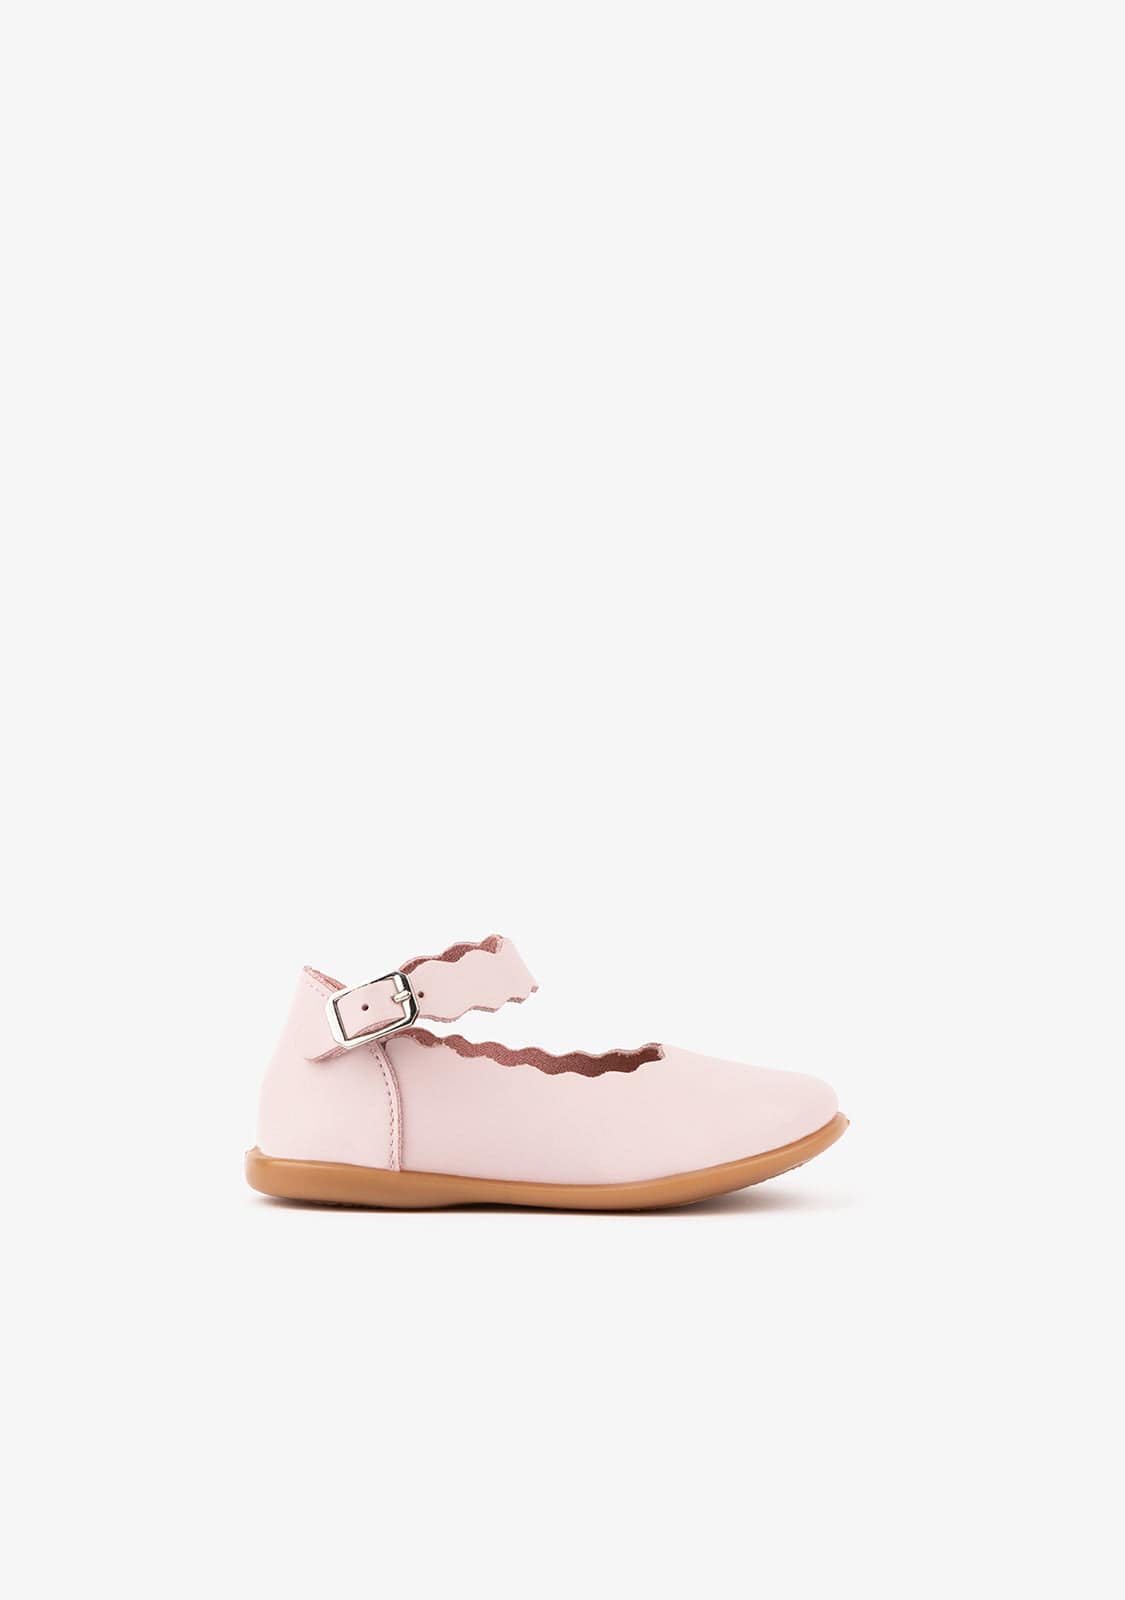 OSITO Shoes Baby's Pink Waves Washable Leather Mary Janes